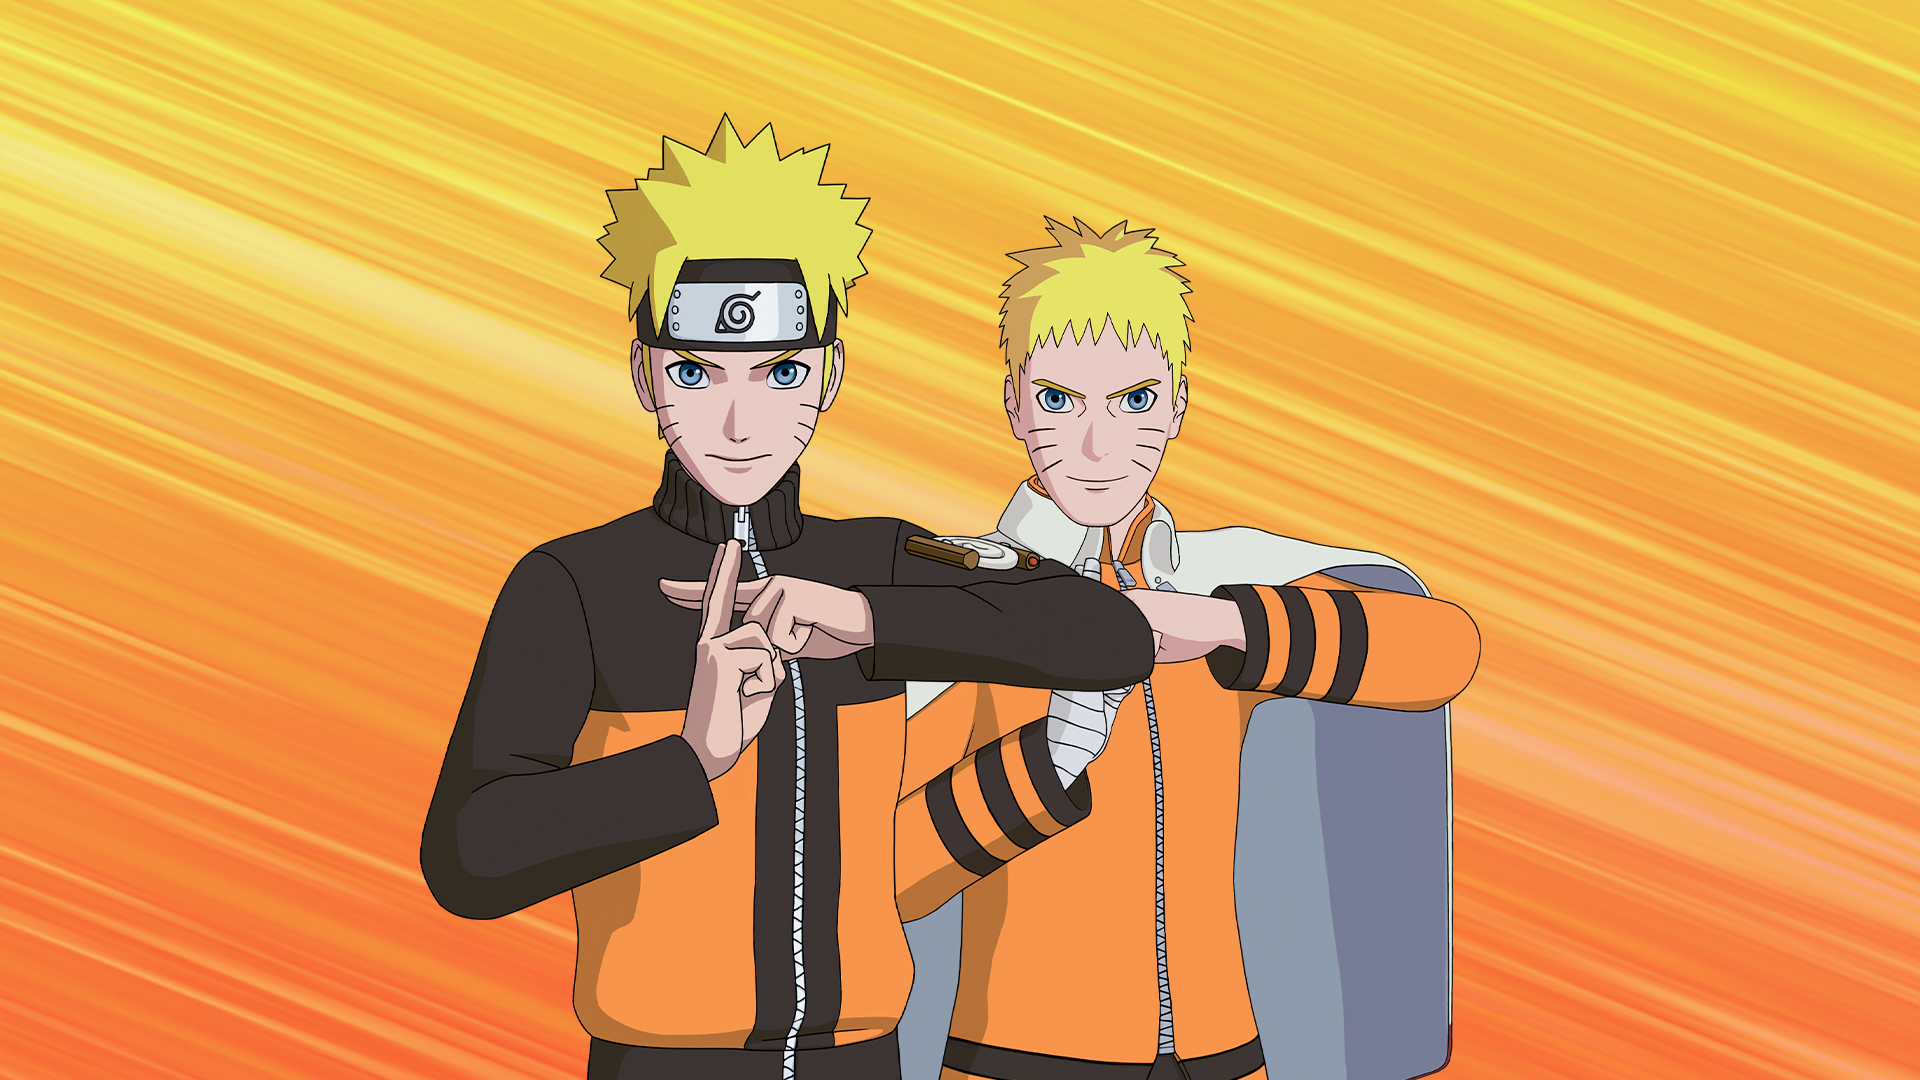 Naruto and his ninja pals are now available in Fortnite